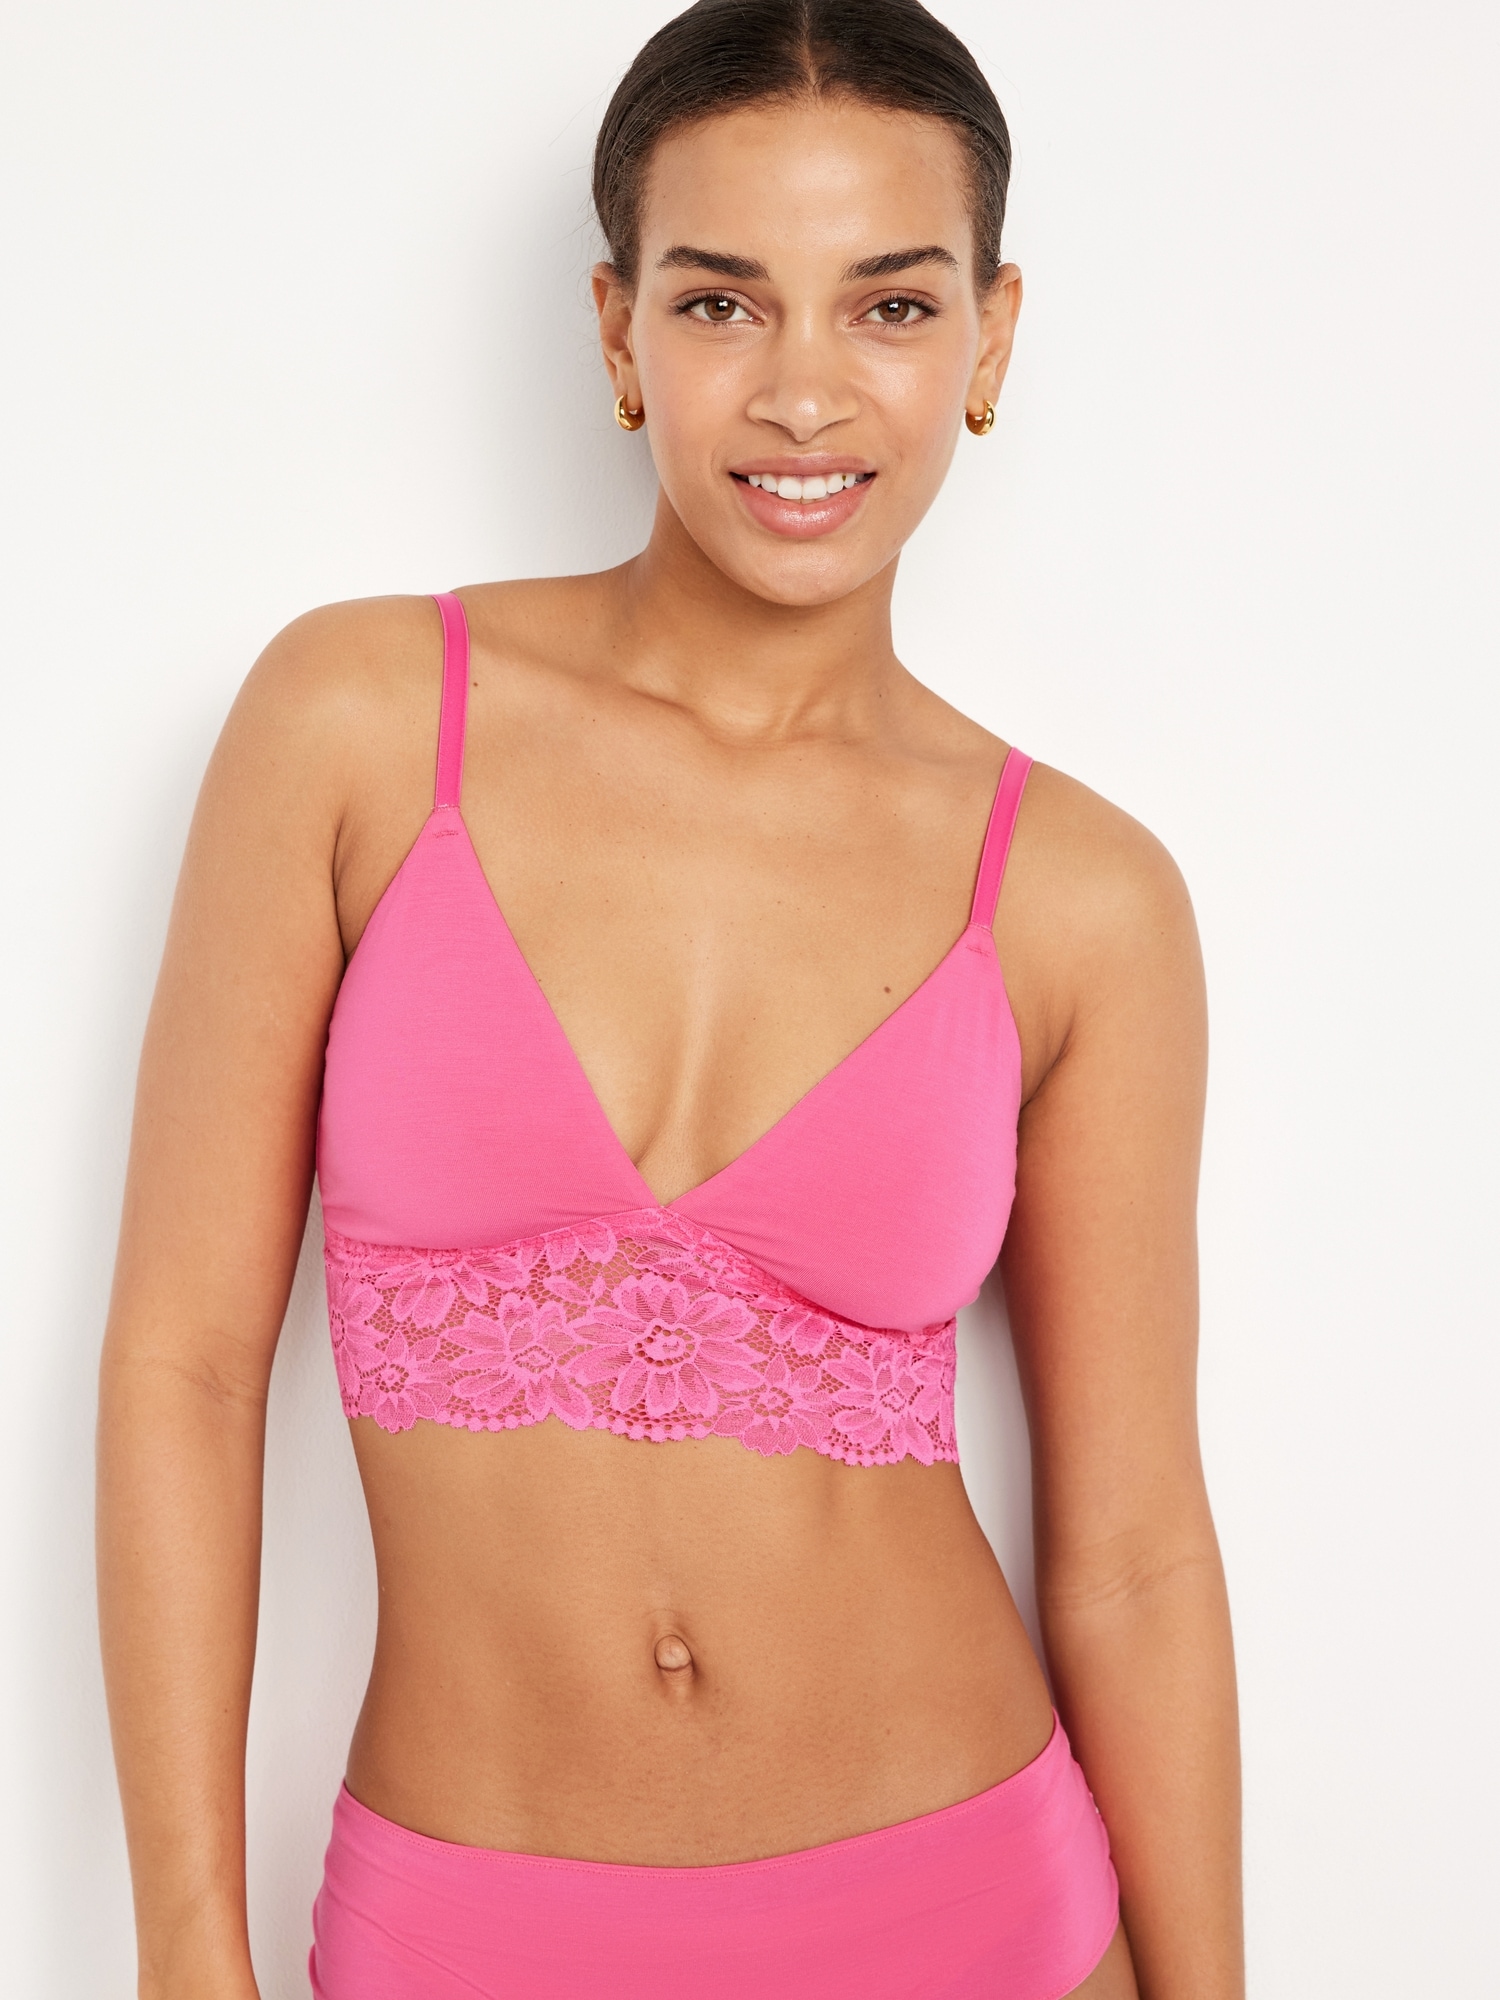 Pack of 3 bralettes in cotton white + navy + pink La Redoute Collections